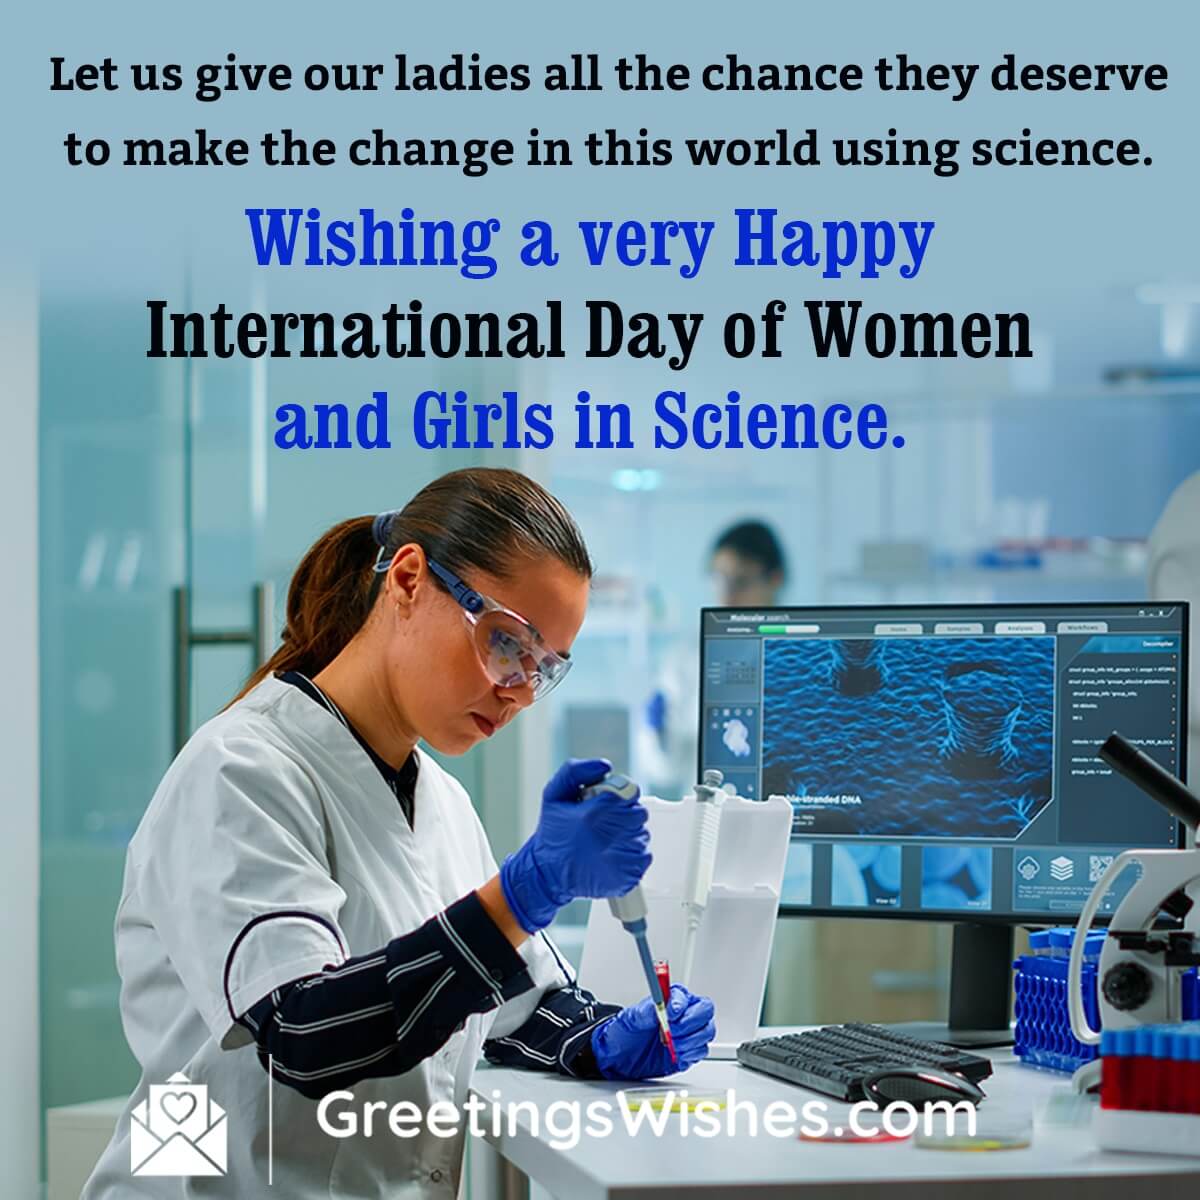 Wishing a very Happy International Day of Women and Girls in Science